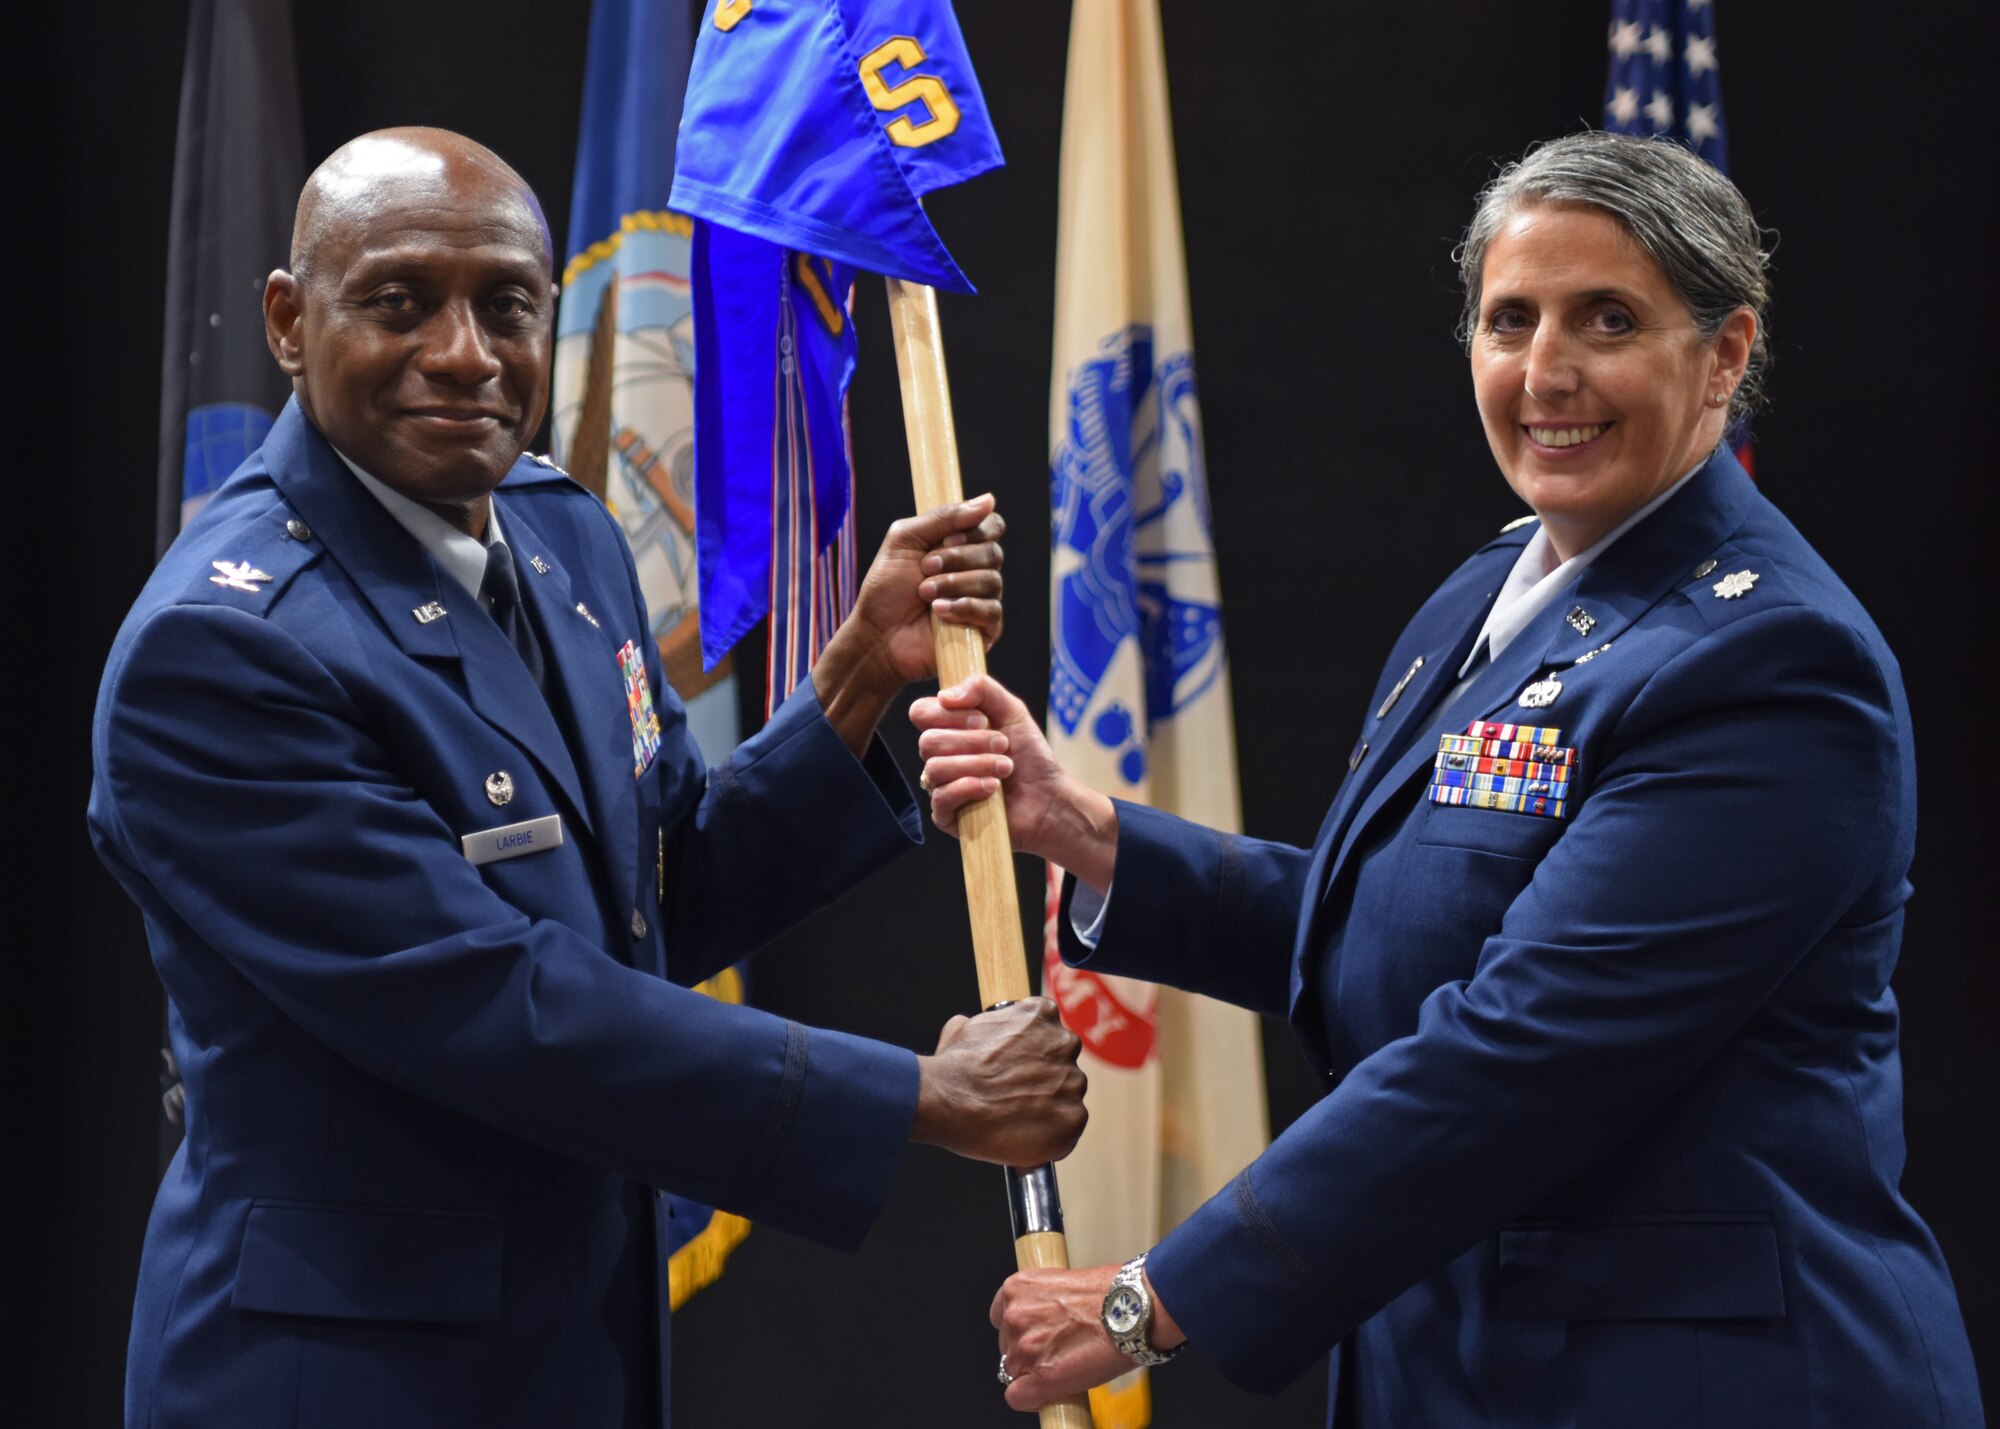 U.S. Air Force Lt. Col. Brenda Miazga, 17th Operational Medical Readiness Squadron incoming commander, (right) assumes command from Col. Derek Larbie, 17th Medical Group commander, during the 17th OMRS change of command ceremony at the Powell Event Center, June 2, 2022. Change of commands are a military tradition representing the transfer of responsibilities from the presiding official to the upcoming official. (U.S. Air Force photo by Senior Airman Ethan Sherwood)